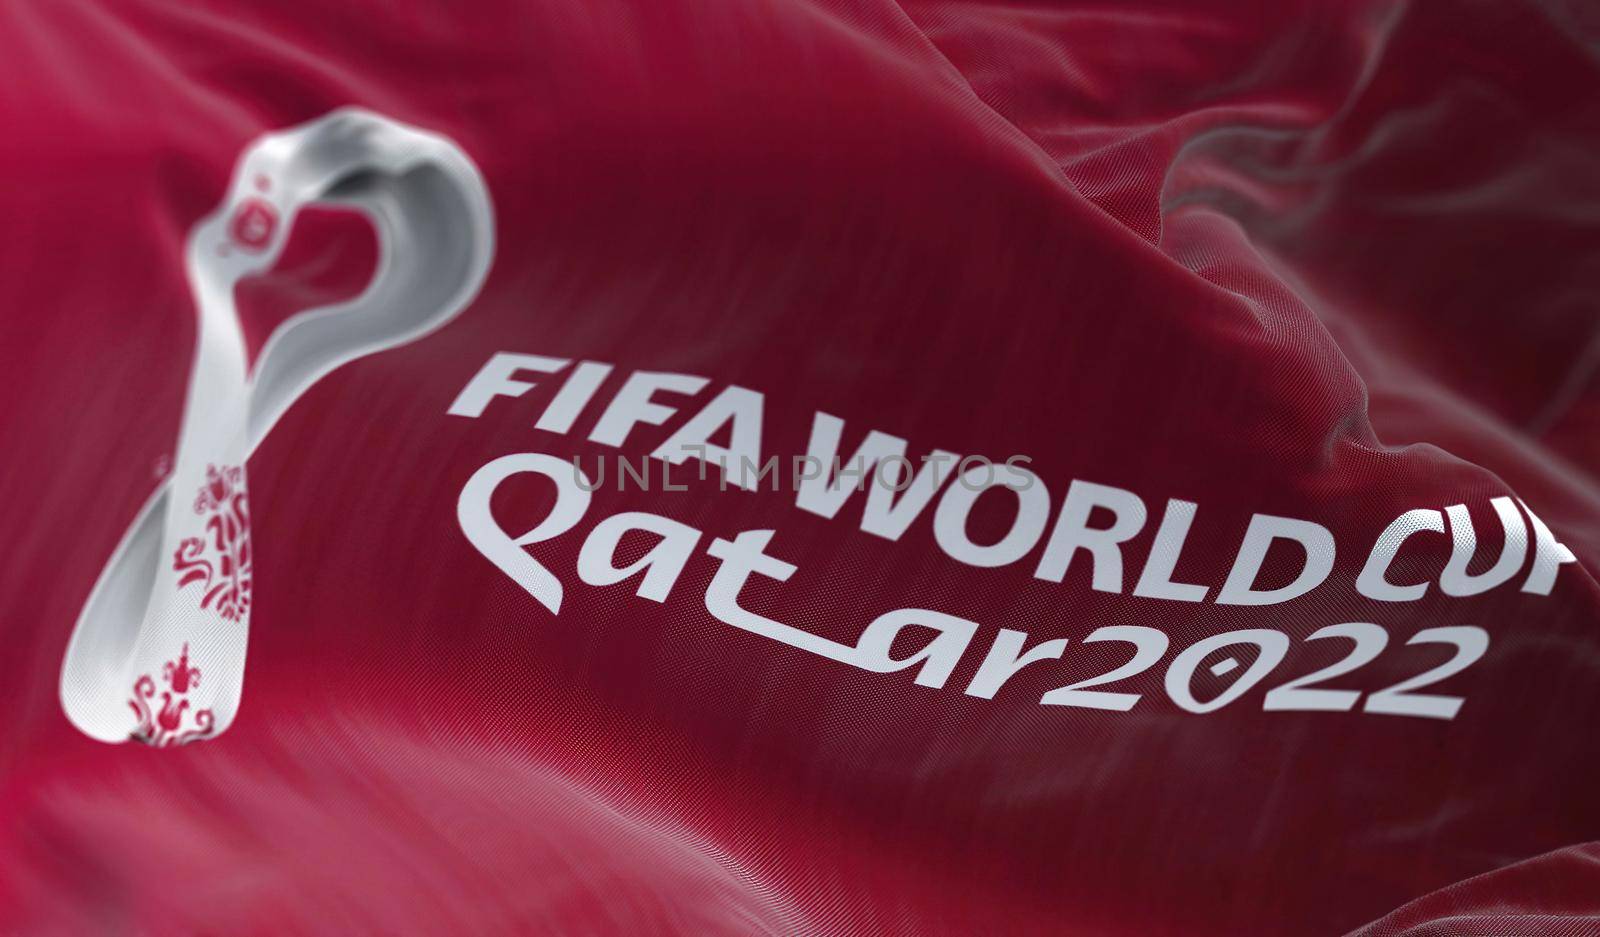 Doha, Qatar, April 2022: A flag with the Qatar 2022 Fifa World Cup logo flapping in the wind. The event is scheduled in Qatar from 21 November to 18 December 2022